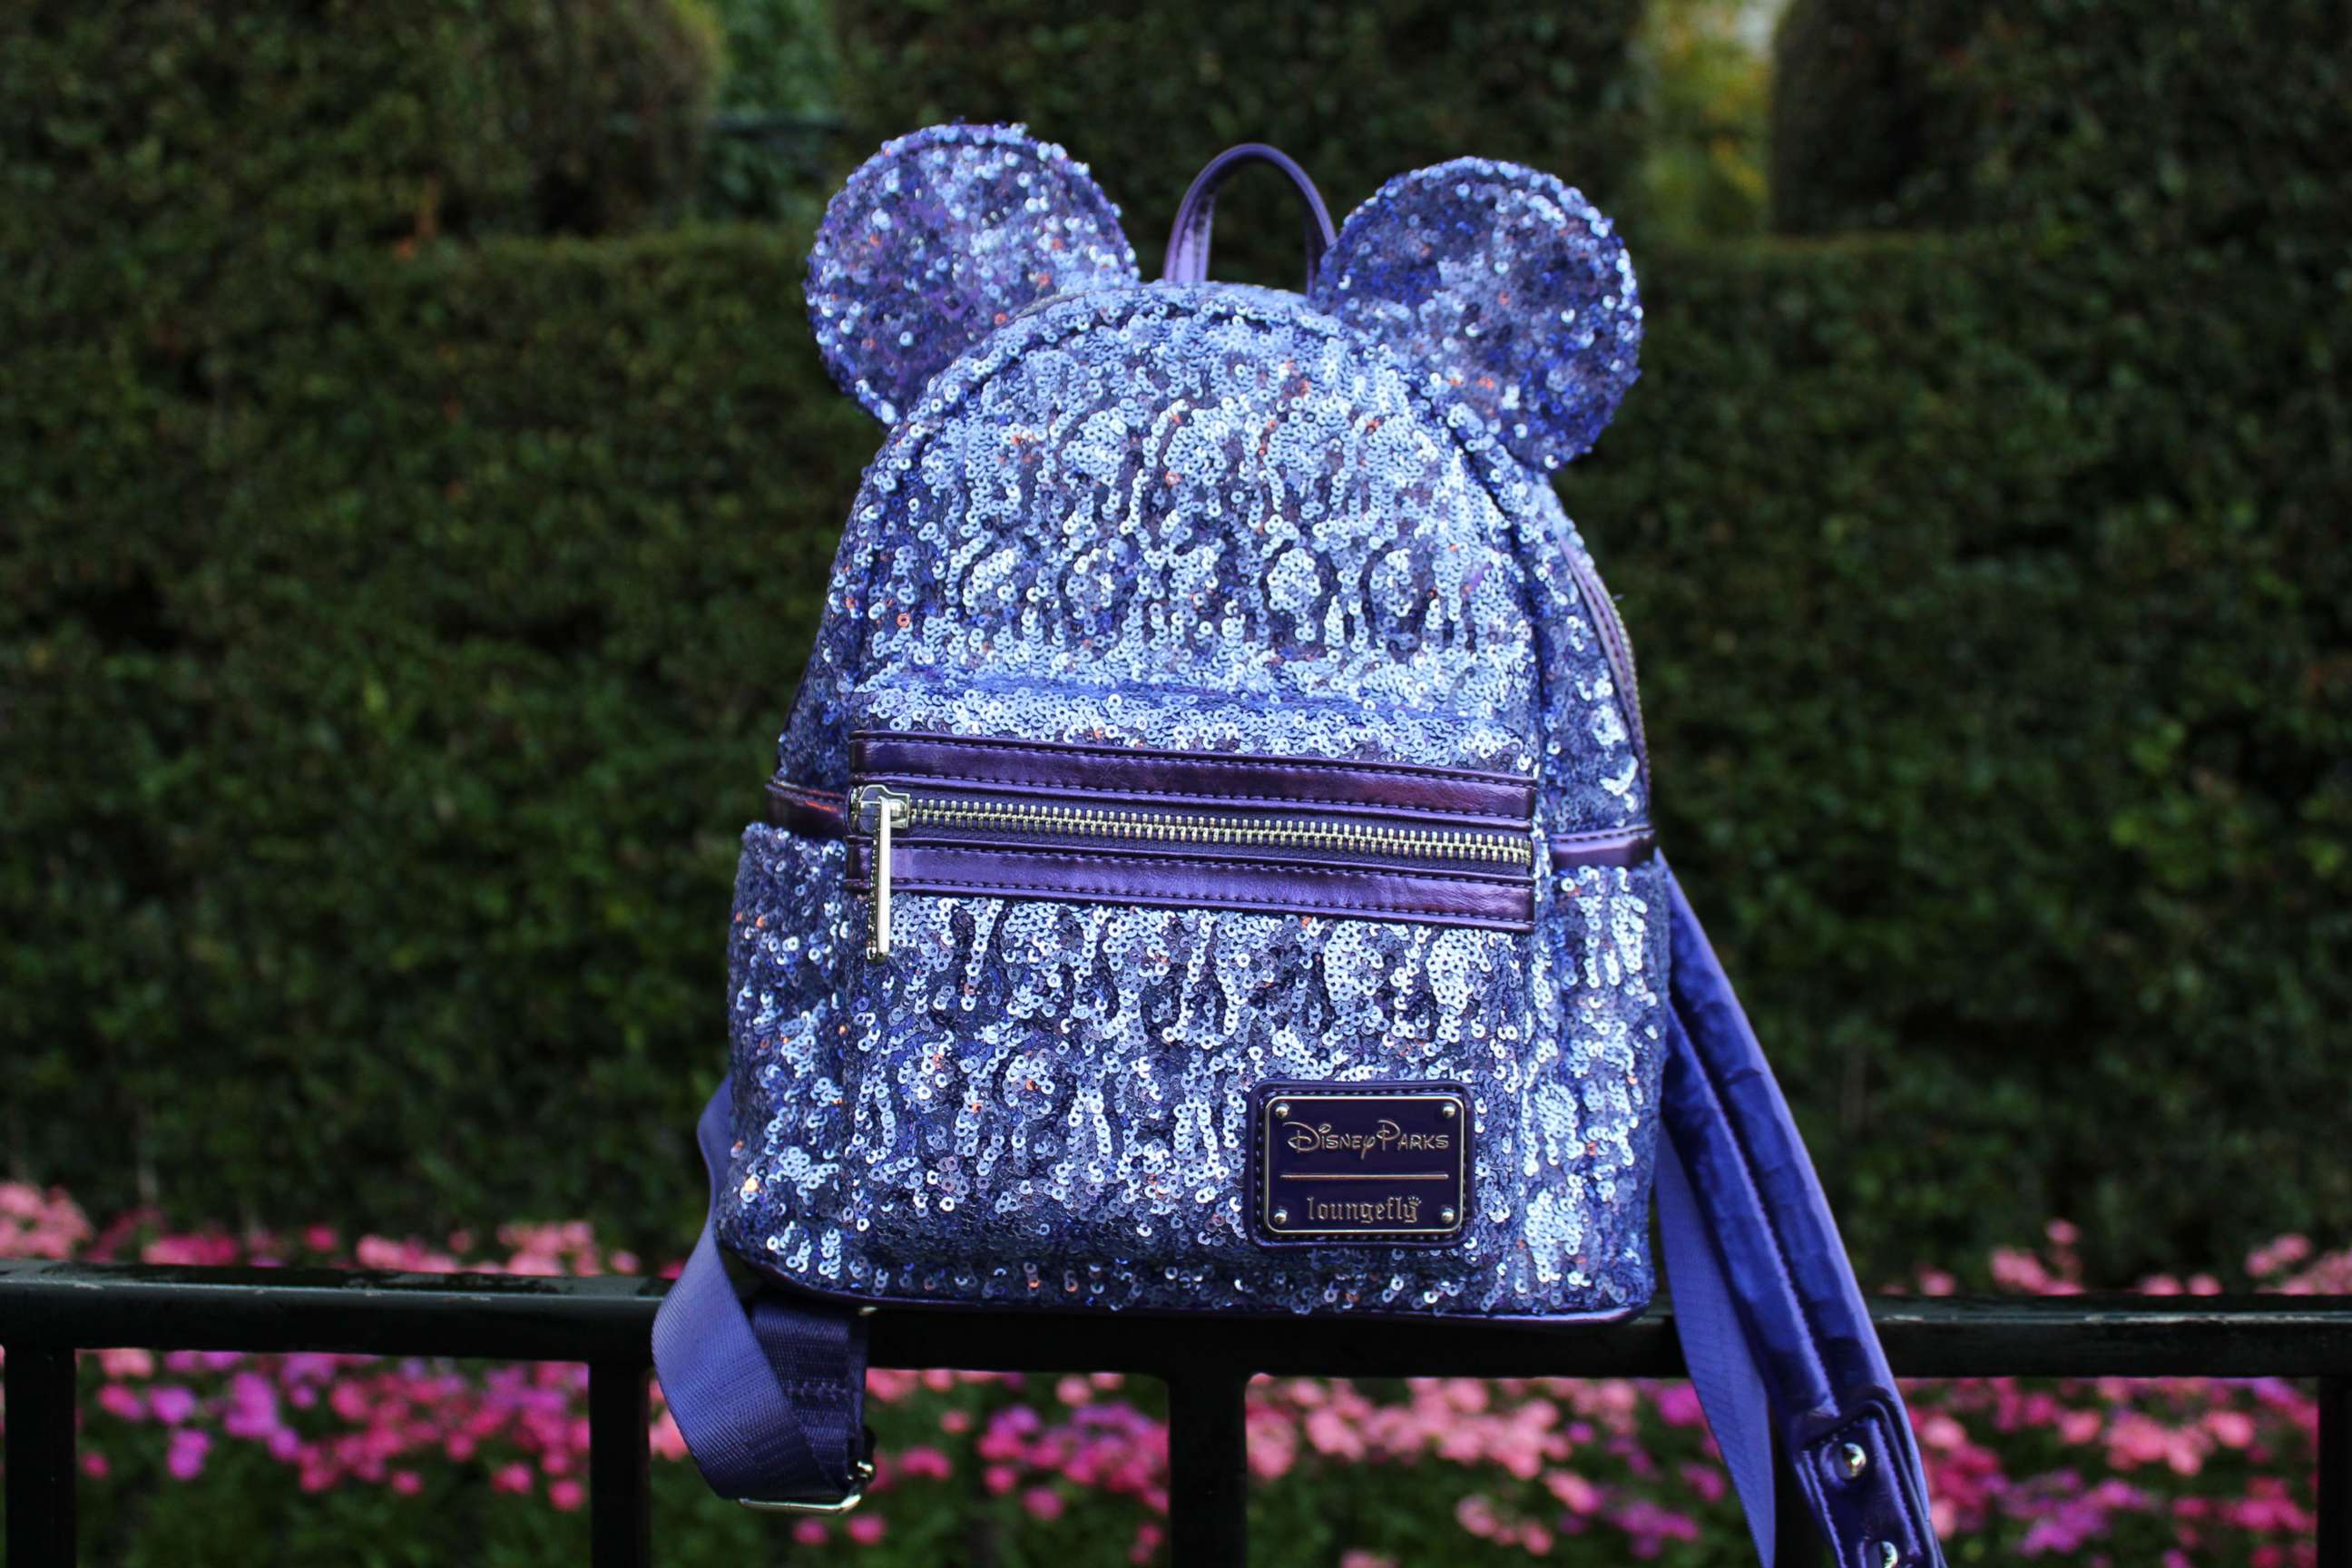 PHOTO: The Loungefly Potion Purple Mini Backpack features a glamorous sequined design and Minnie ears with her signature bow.